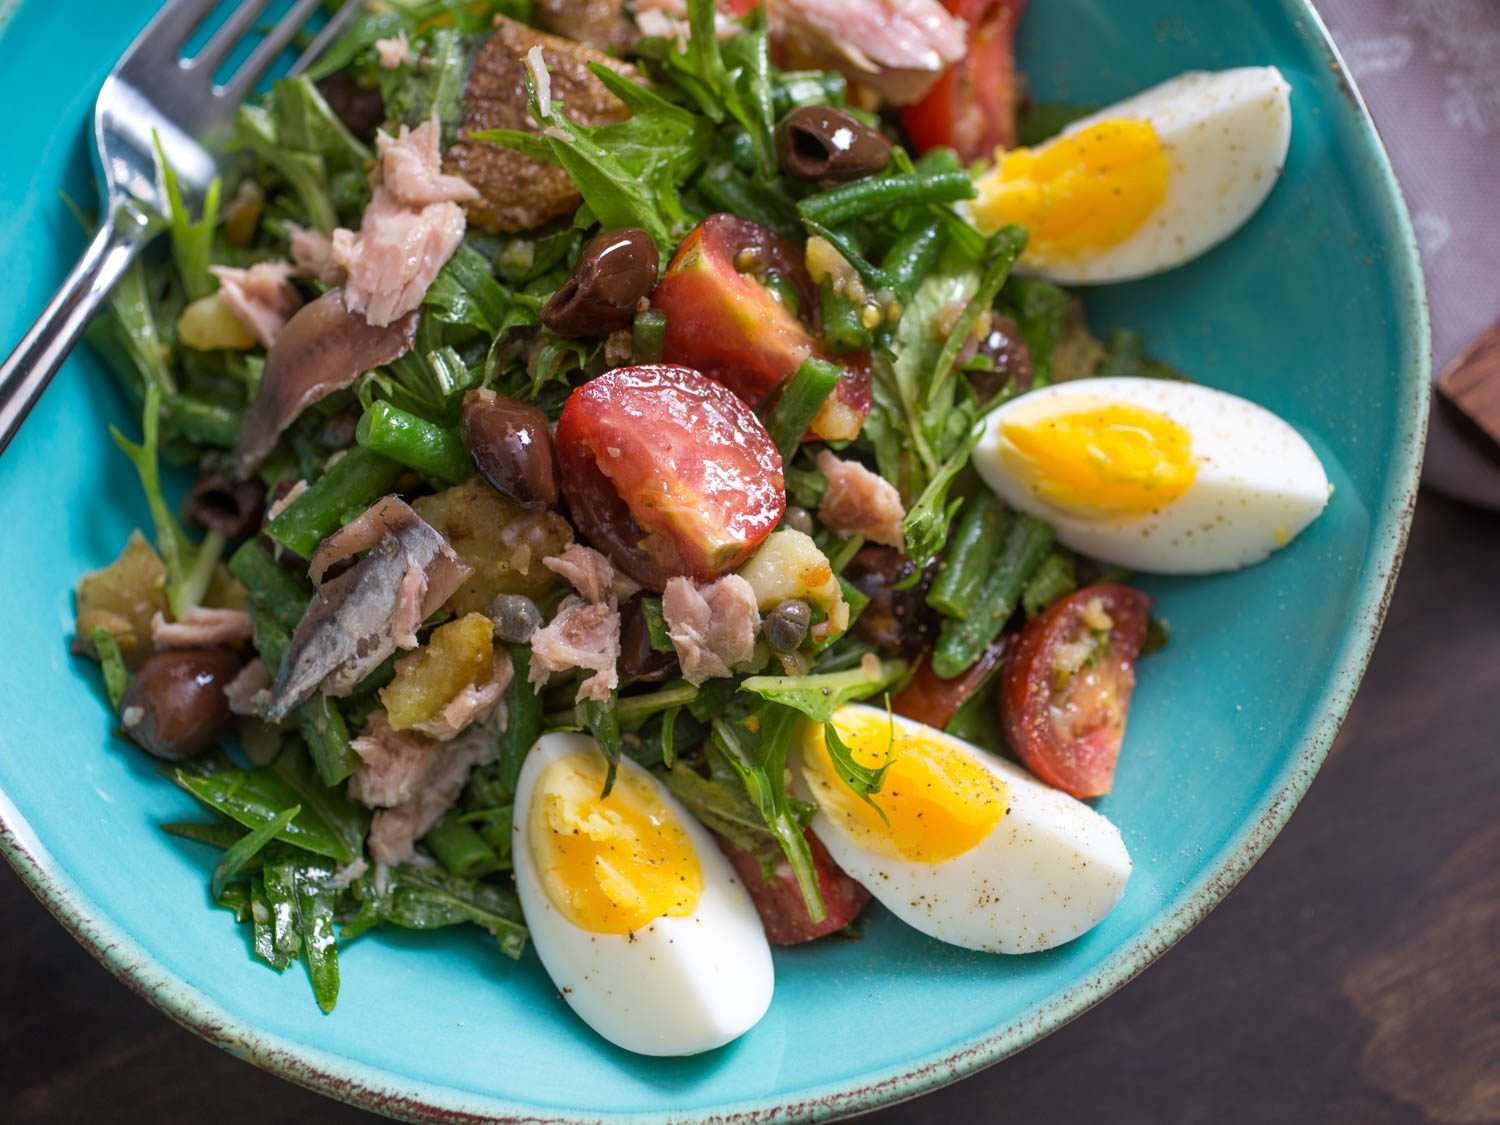 Overhead photo of nicoise salad in teal serving bowl.